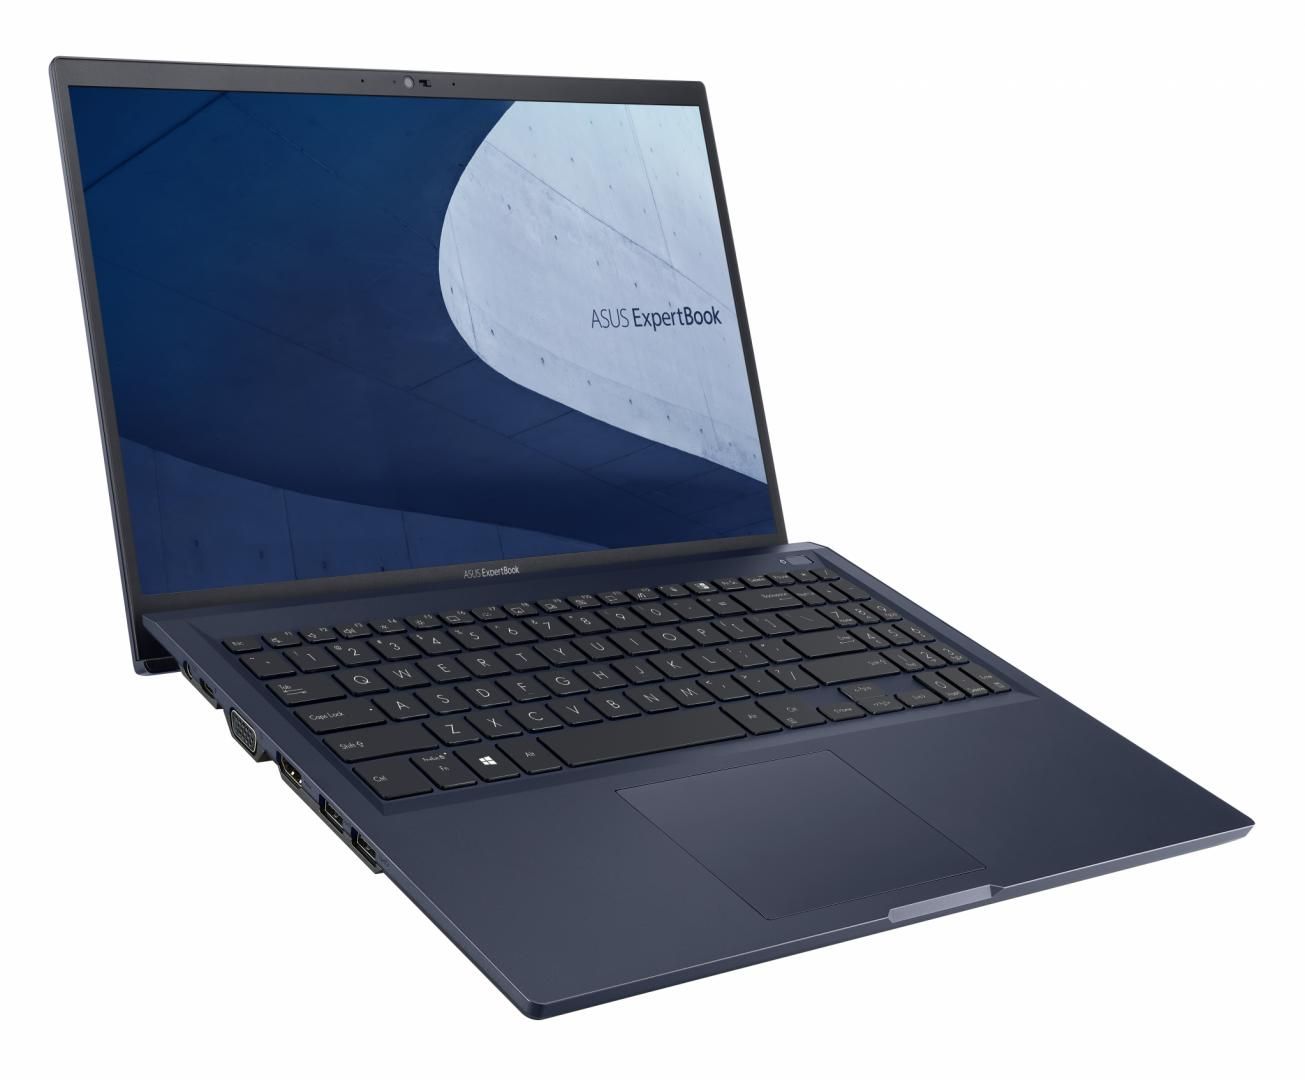 Laptop ASUS Business ExpertBook B1500CEPE-BQ0563R, 15.0-inch, FHD (1920 x 1080) 16:9, Procesor Intel® Core™ i5-1135G7 Processor 2.4 GHz (8M Cache, up to 4.2 GHz, 4 cores), 8GB DDR4, 512GB SSD, NVIDIA® GeForce® MX330, Windows 10 Pro, Star Black_1